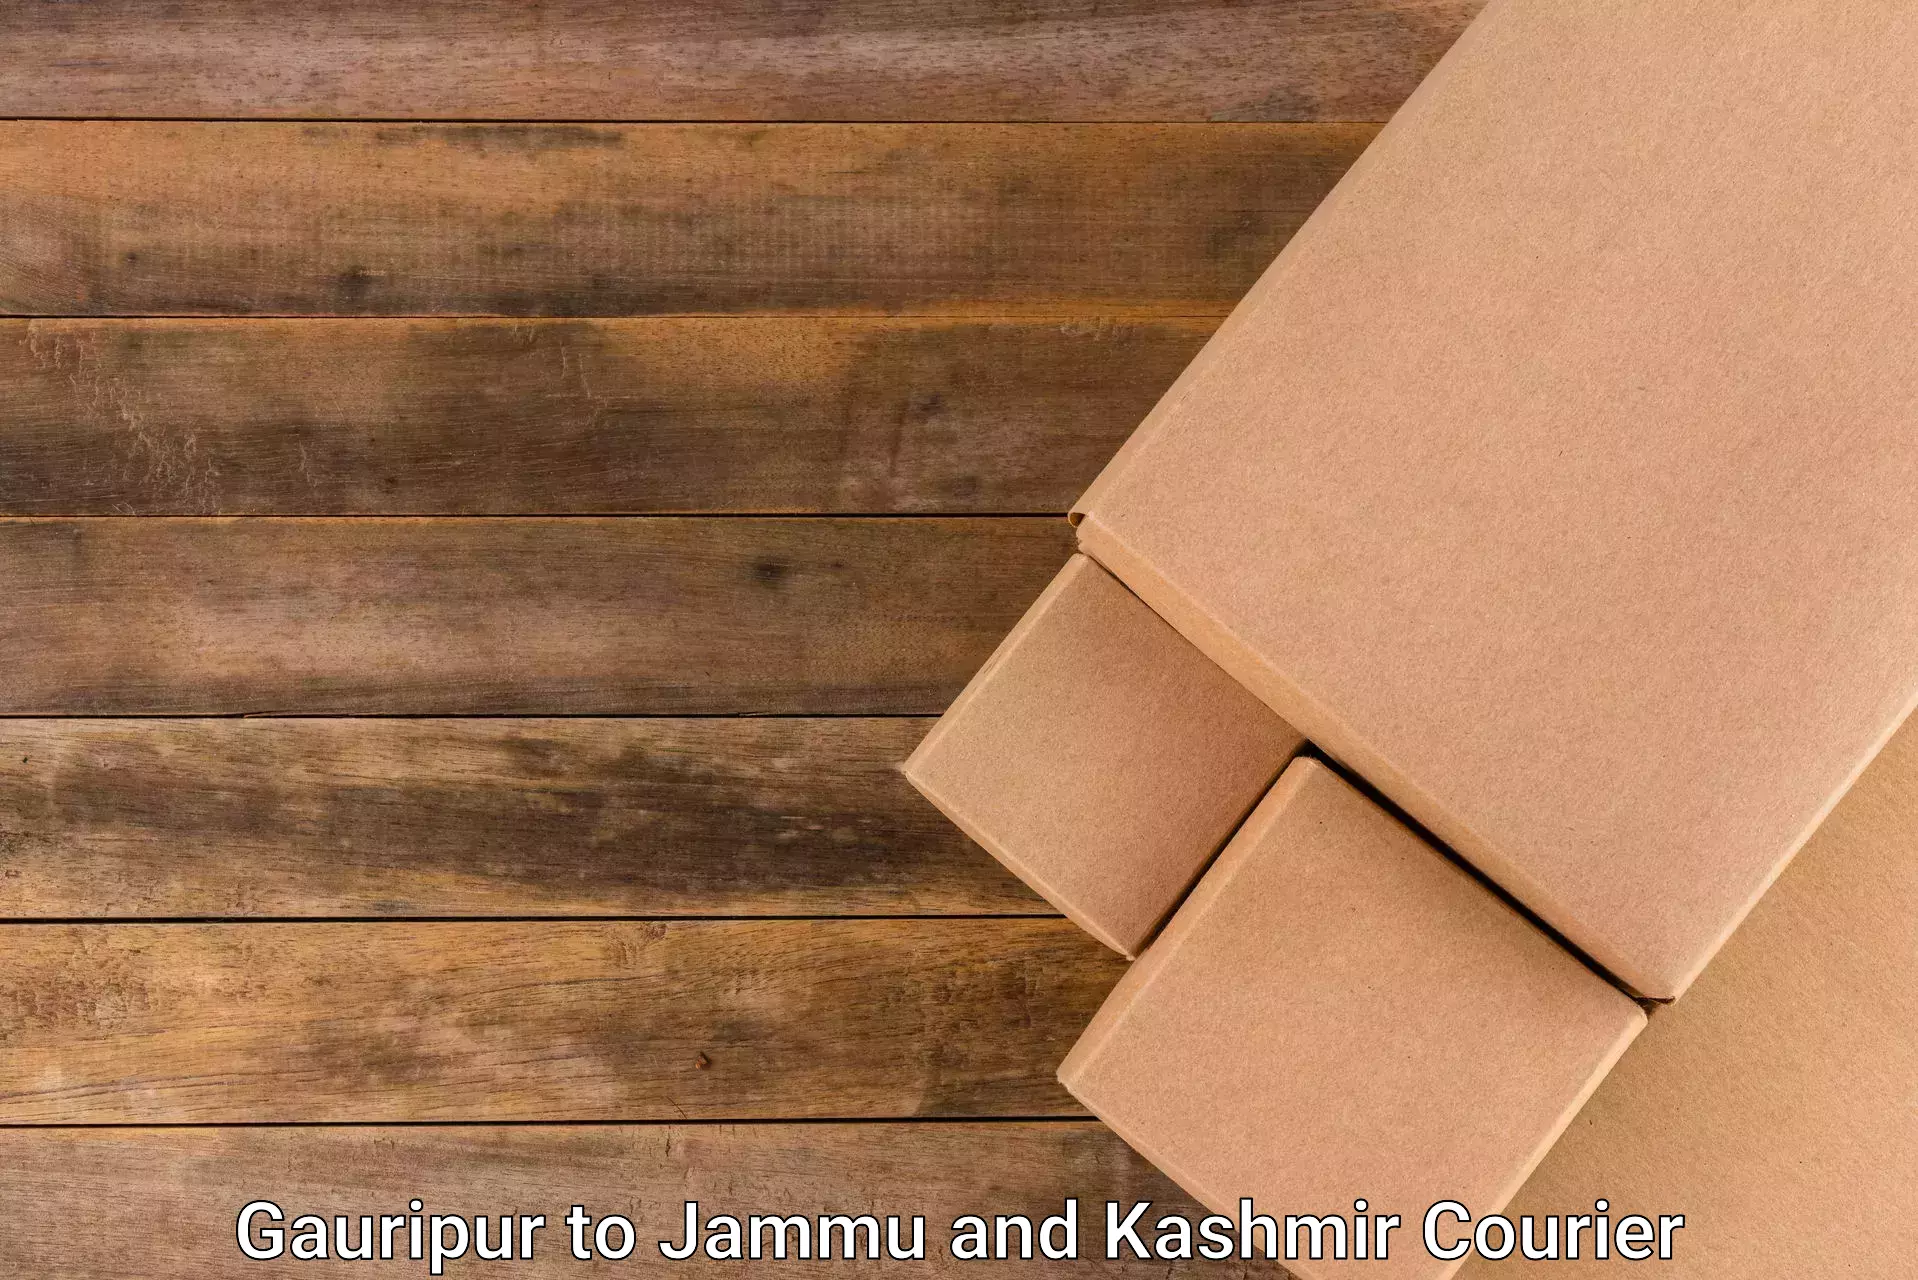 Next day courier Gauripur to Jammu and Kashmir